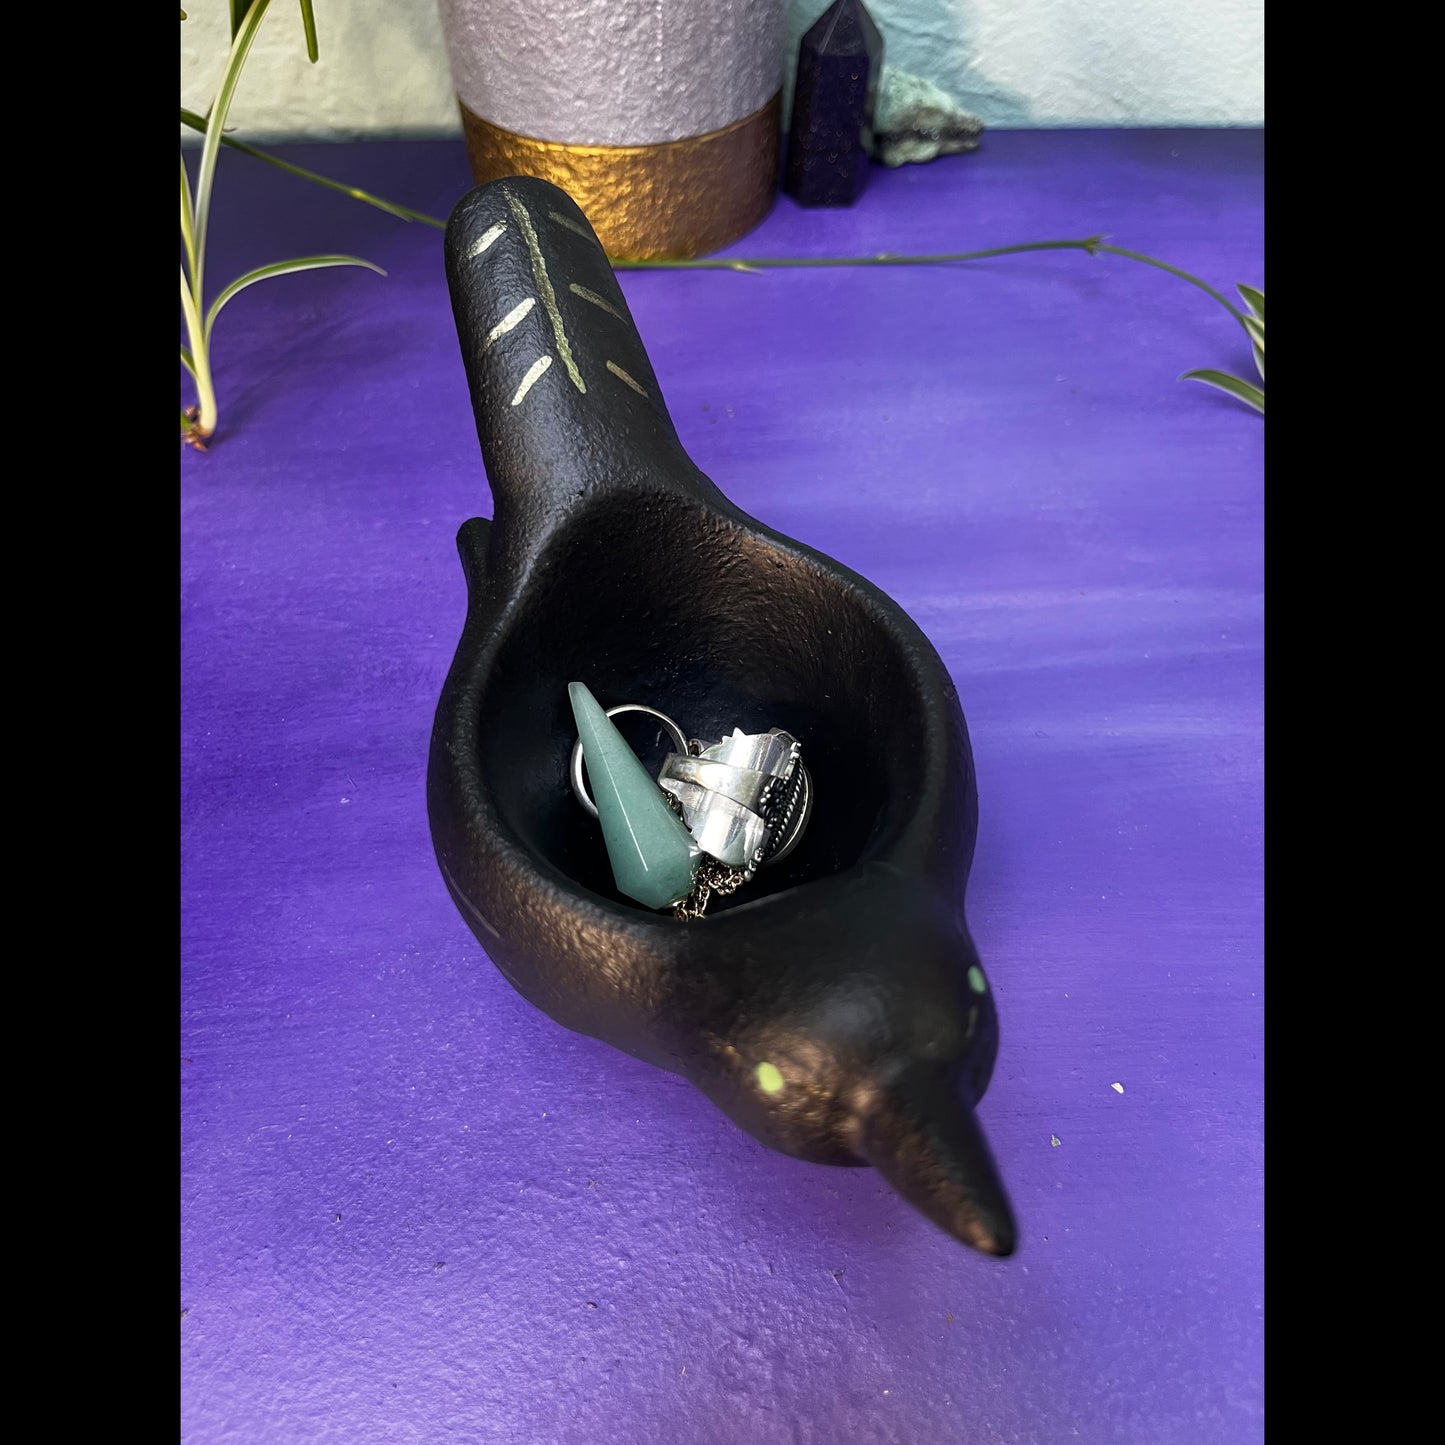 Crow Jewelry Holder infused with Lavender and Sea Salt